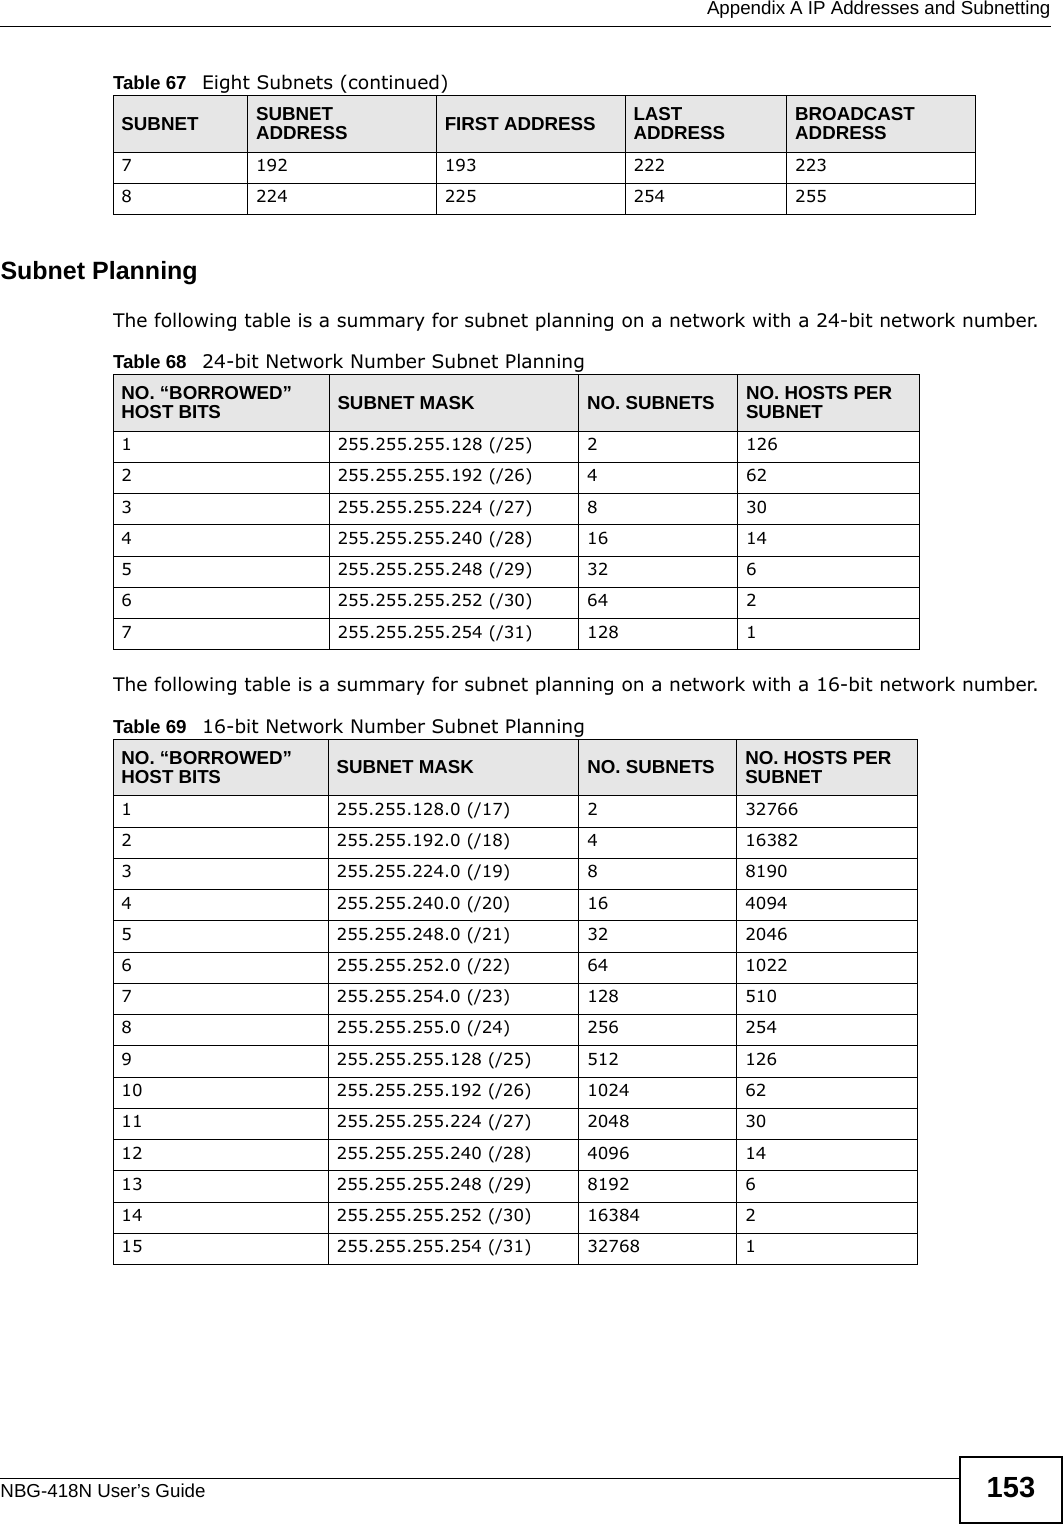  Appendix A IP Addresses and SubnettingNBG-418N User’s Guide 153Subnet PlanningThe following table is a summary for subnet planning on a network with a 24-bit network number.The following table is a summary for subnet planning on a network with a 16-bit network number. 7192 193 222 2238224 225 254 255Table 67   Eight Subnets (continued)SUBNET SUBNET ADDRESS FIRST ADDRESS LAST ADDRESS BROADCAST ADDRESSTable 68   24-bit Network Number Subnet PlanningNO. “BORROWED” HOST BITS SUBNET MASK NO. SUBNETS NO. HOSTS PER SUBNET1255.255.255.128 (/25) 21262255.255.255.192 (/26) 4623255.255.255.224 (/27) 8304255.255.255.240 (/28) 16 145255.255.255.248 (/29) 32 66255.255.255.252 (/30) 64 27255.255.255.254 (/31) 128 1Table 69   16-bit Network Number Subnet PlanningNO. “BORROWED” HOST BITS SUBNET MASK NO. SUBNETS NO. HOSTS PER SUBNET1255.255.128.0 (/17) 2327662255.255.192.0 (/18) 4163823255.255.224.0 (/19) 881904255.255.240.0 (/20) 16 40945255.255.248.0 (/21) 32 20466255.255.252.0 (/22) 64 10227255.255.254.0 (/23) 128 5108255.255.255.0 (/24) 256 2549255.255.255.128 (/25) 512 12610 255.255.255.192 (/26) 1024 6211 255.255.255.224 (/27) 2048 3012 255.255.255.240 (/28) 4096 1413 255.255.255.248 (/29) 8192 614 255.255.255.252 (/30) 16384 215 255.255.255.254 (/31) 32768 1